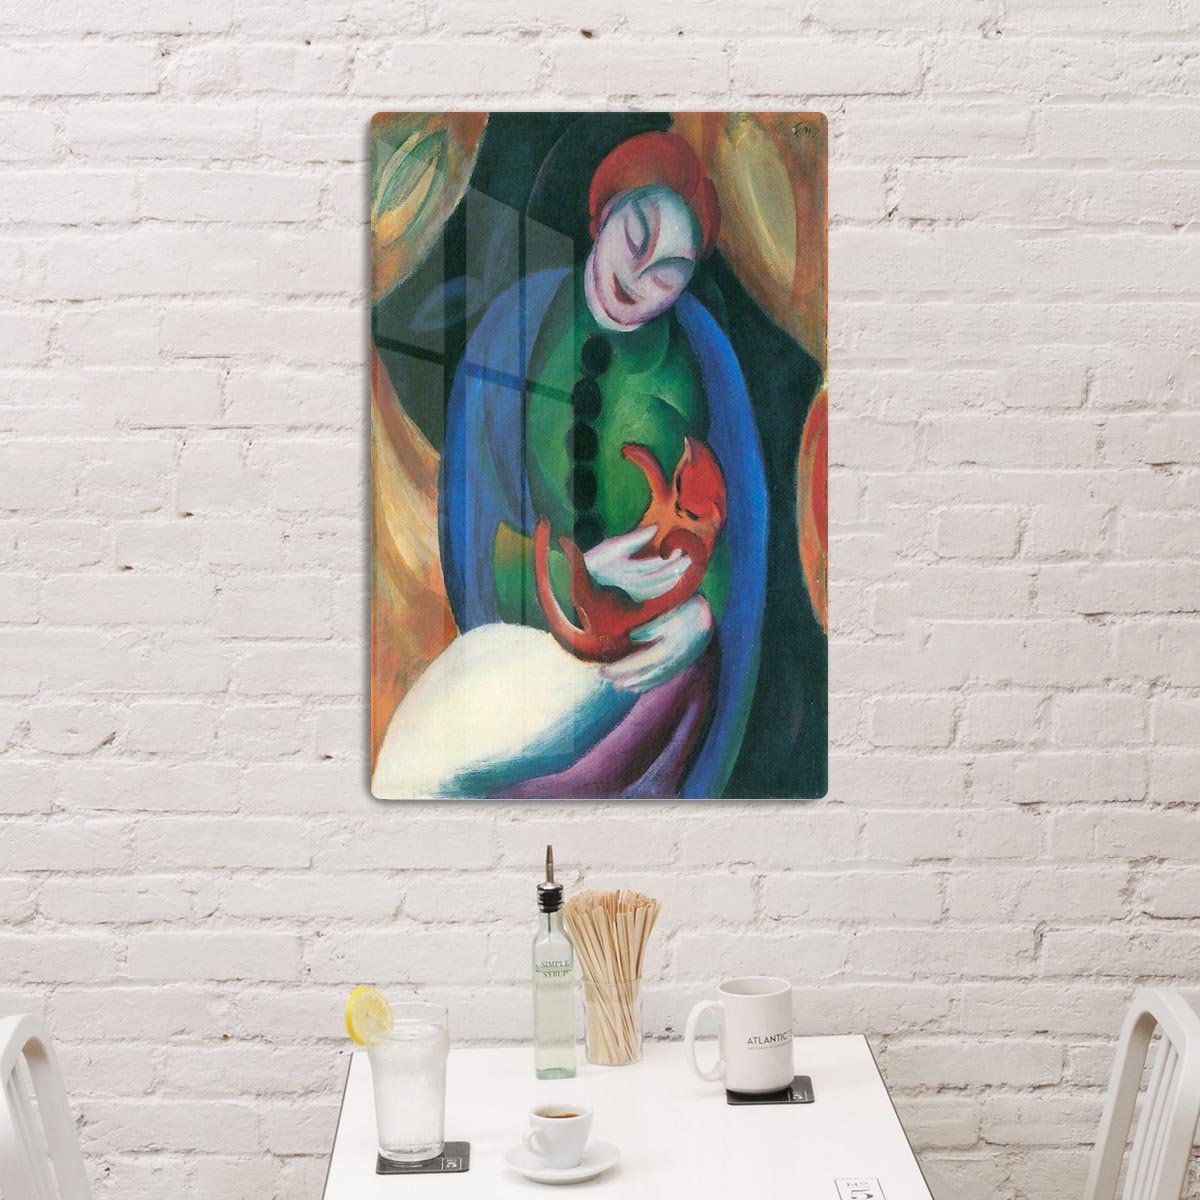 Girl with a Cat II by Franz Marc HD Metal Print